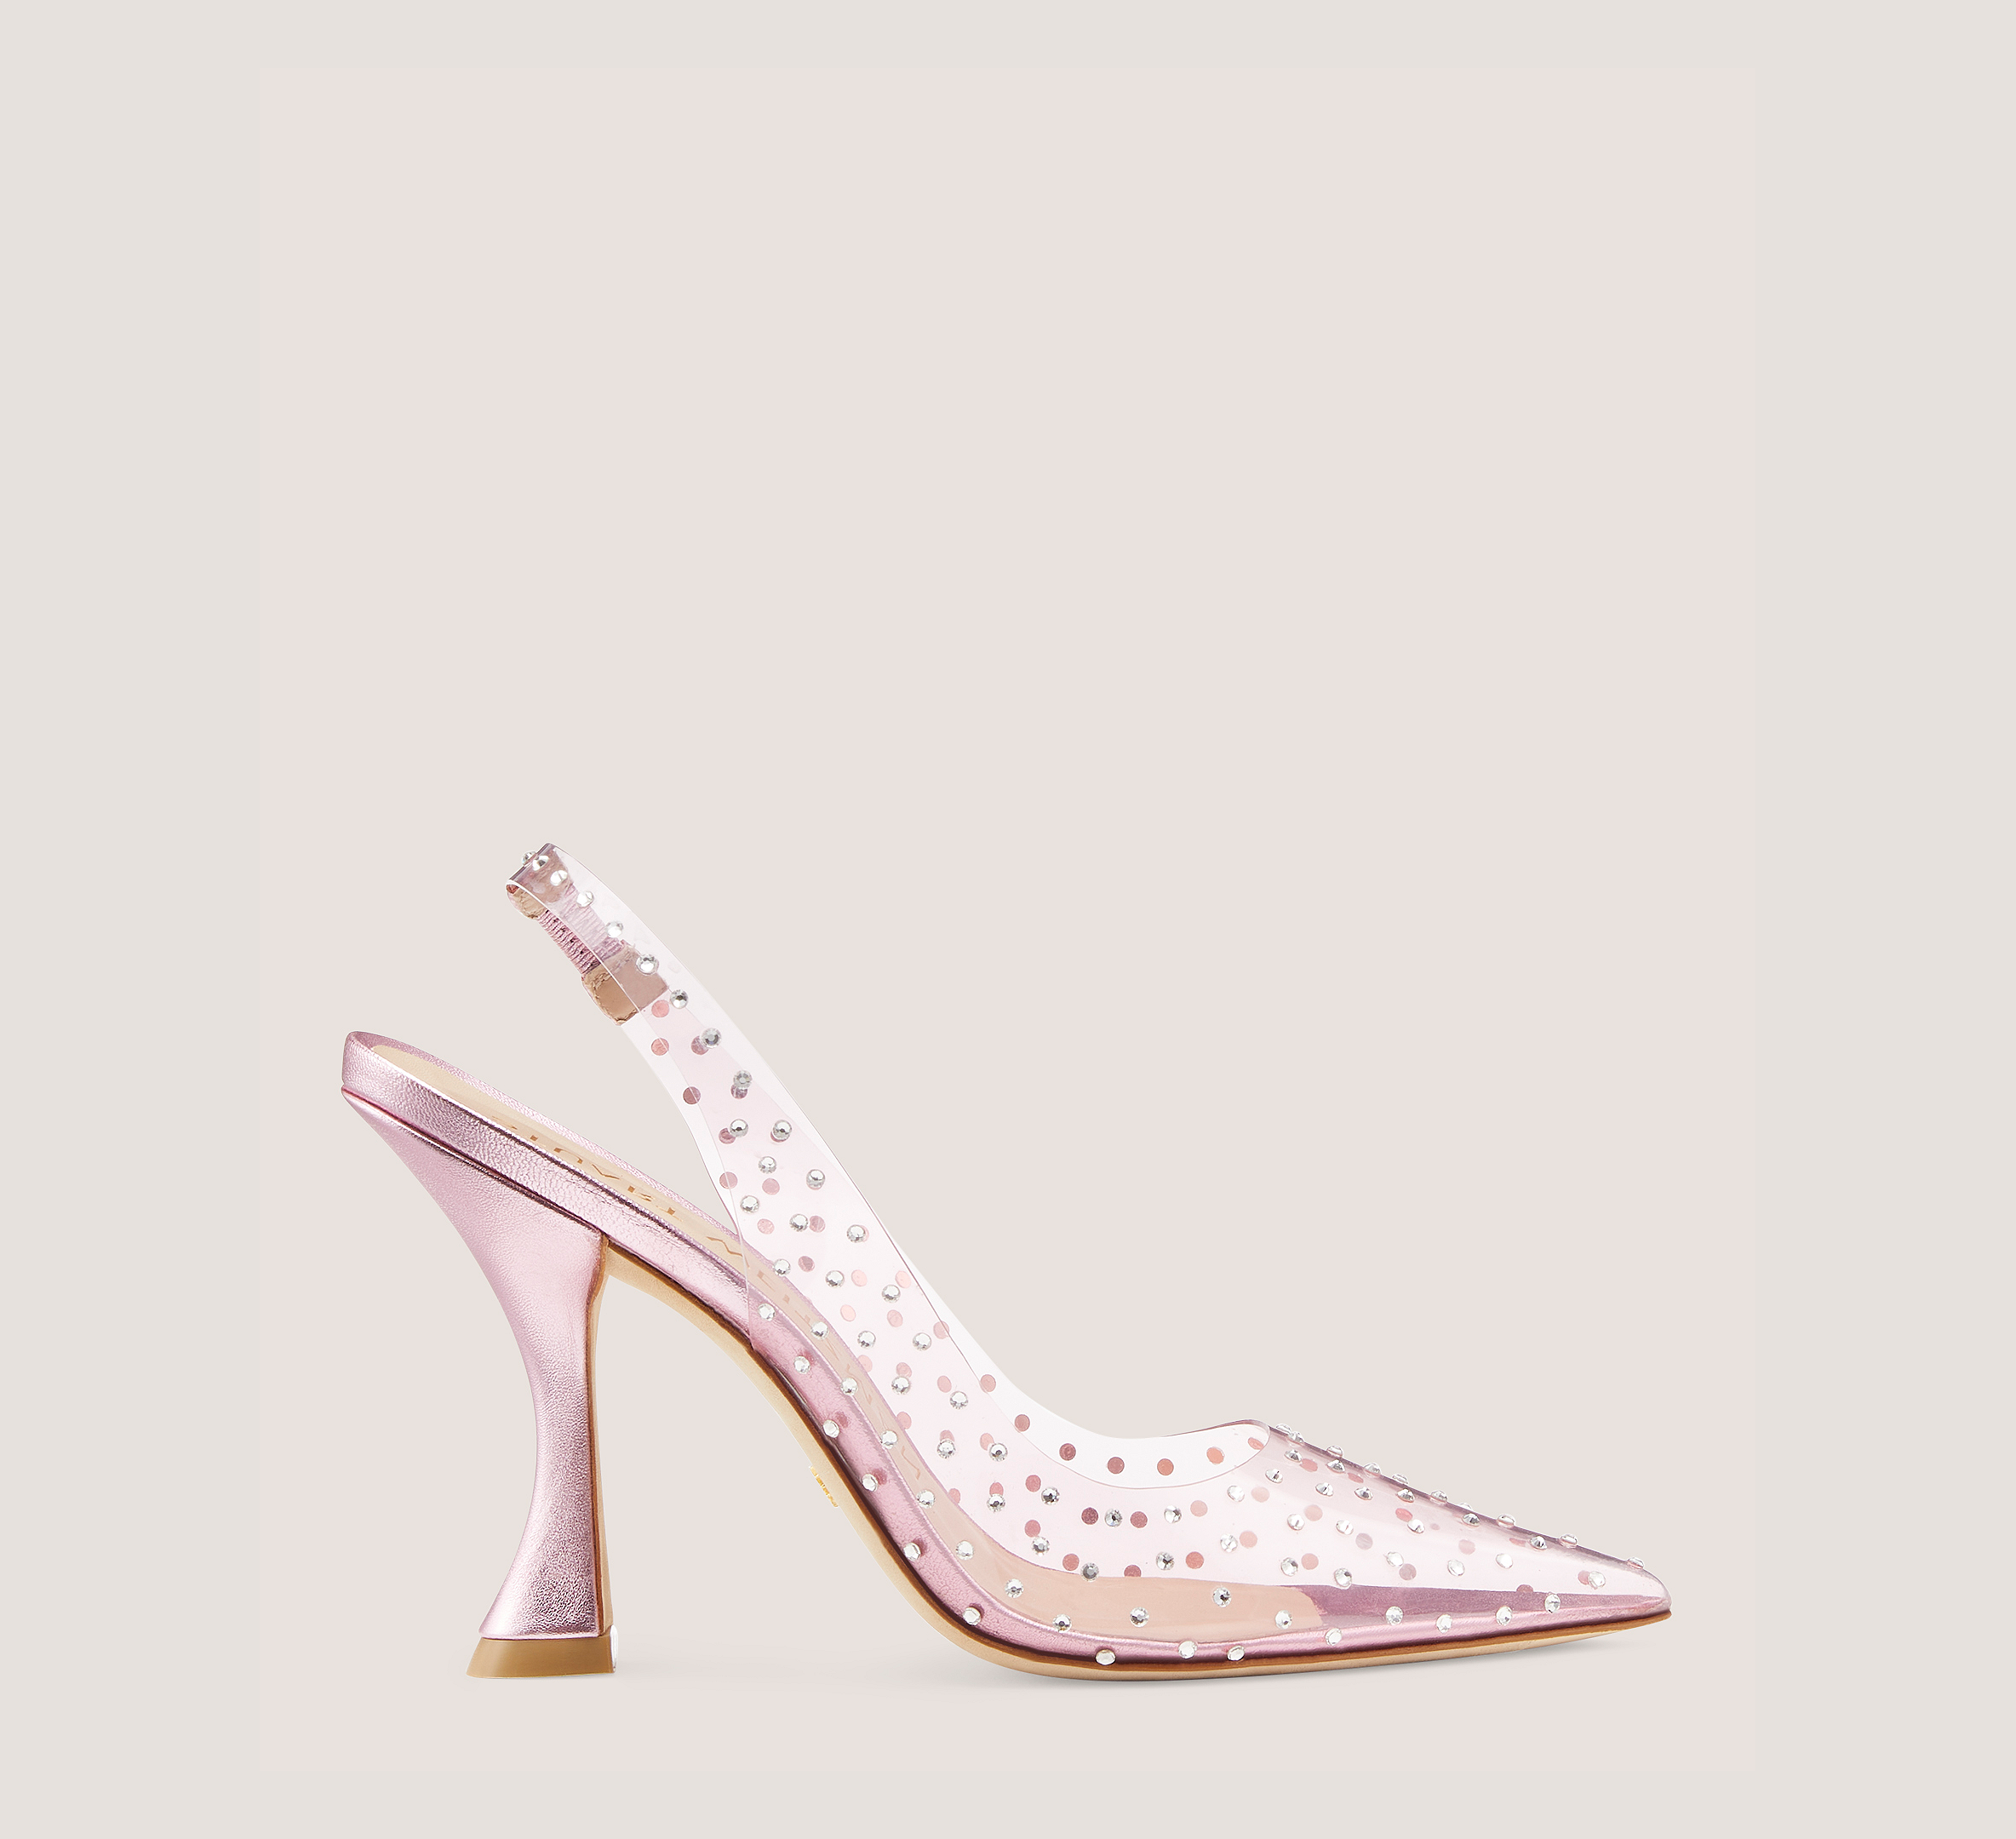 Stuart Weitzman Glam Xcurve 100 Slingback The Sw Outlet In Light Pink/cotton Candy/clear